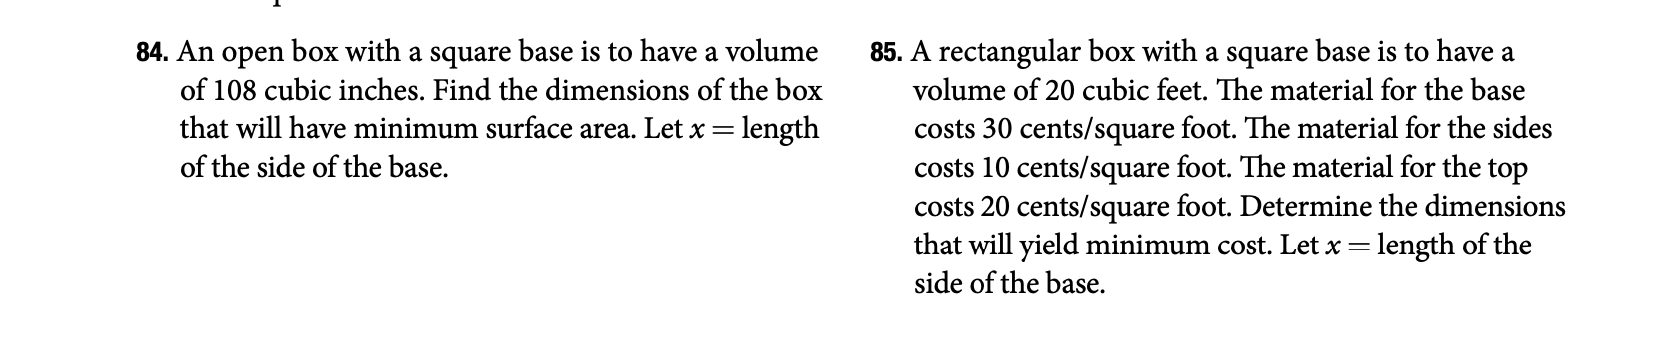 84. An open box with a square base is to have a volume
of 108 cubic inches. Find the dimensions of the box
that will have minimum surface area. Let x = length
of the side of the base.
